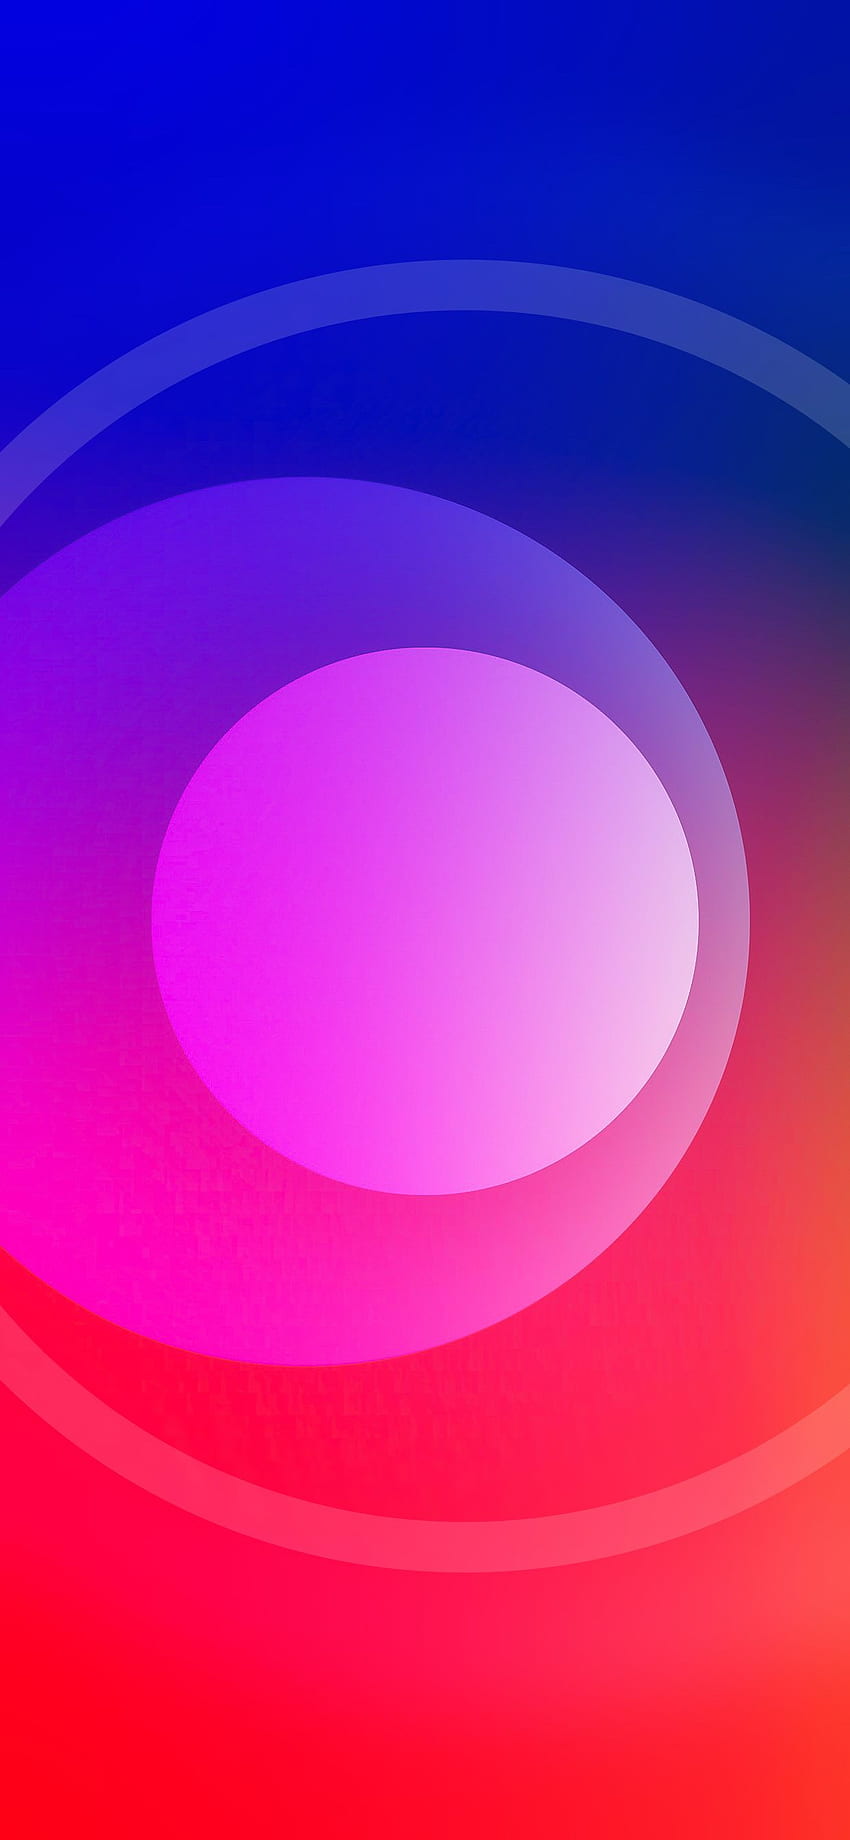 Download iOS 12 Wallpapers 8 Wallpapers  DroidViews